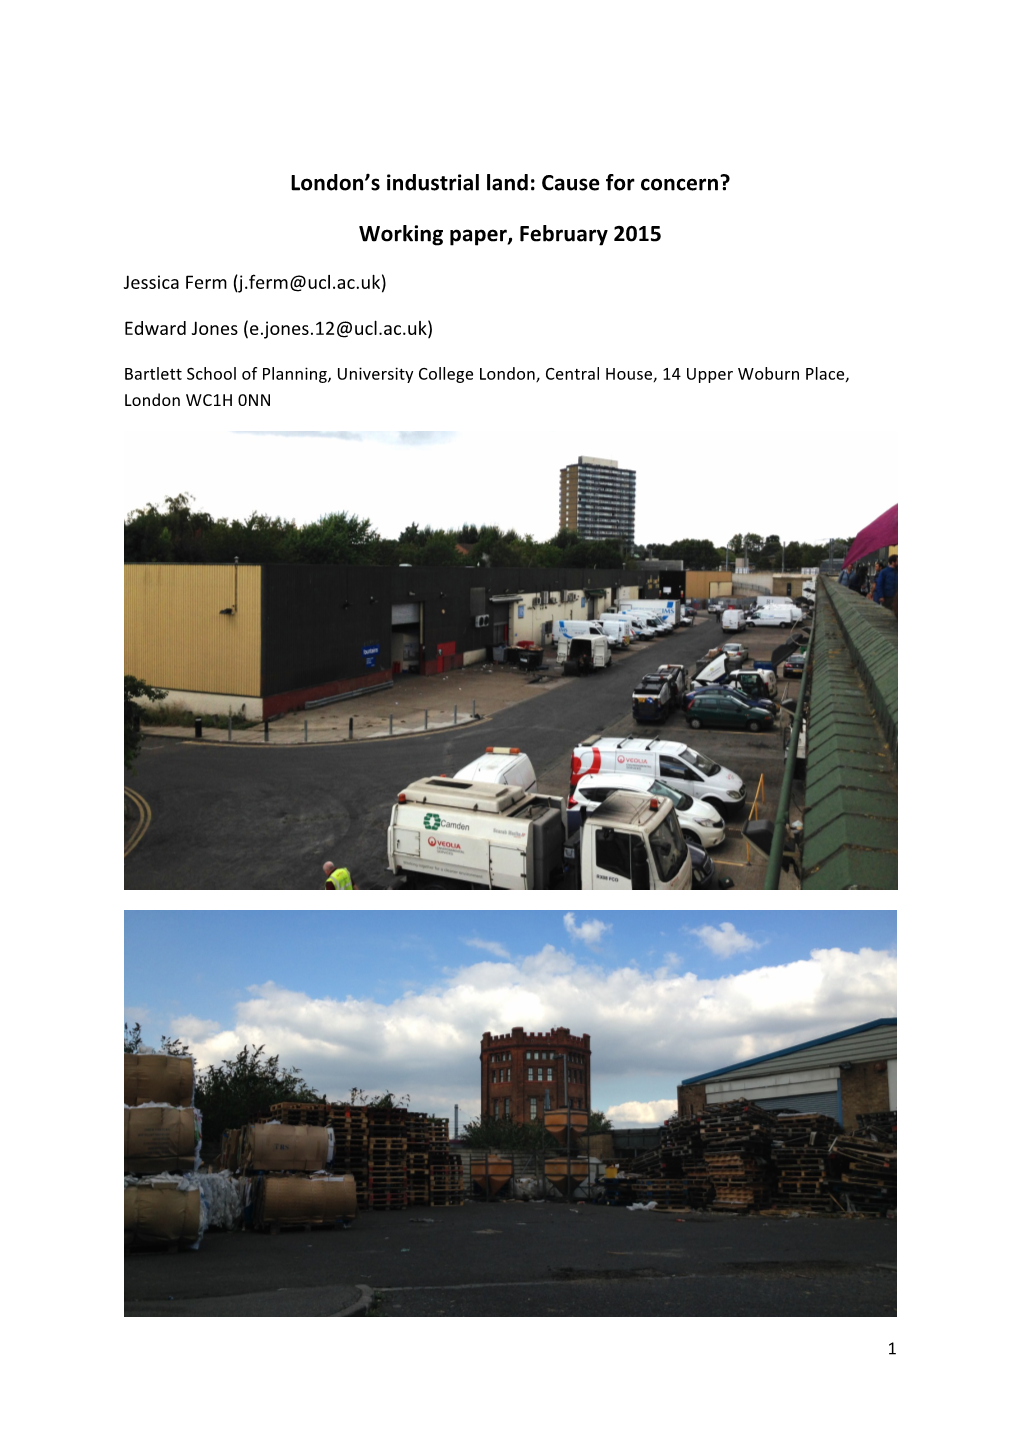 London's Industrial Land: Cause for Concern? Working Paper, February